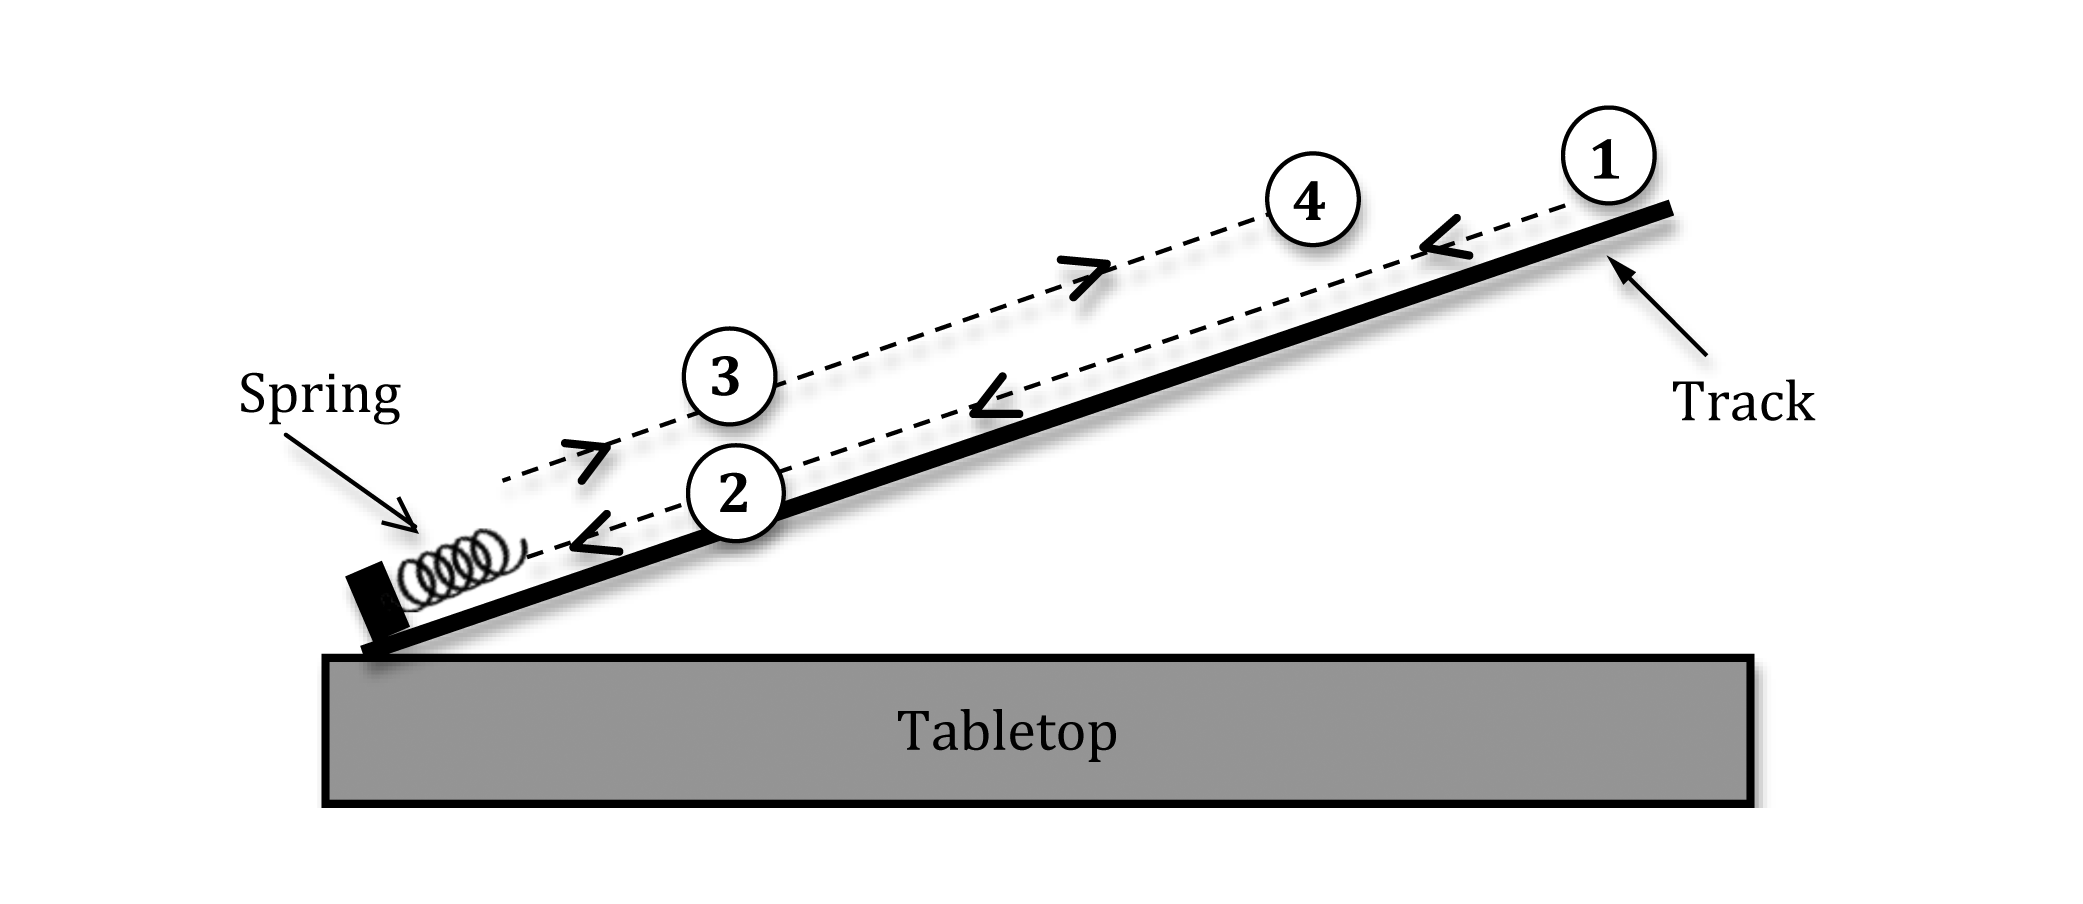 A rectangle labeled Tabletop forms an acute angle with a line labeled Track.  An object labeled Spring is attached to another rectangle connected to the lower end of the Track such that the Spring is parallel to the Track.  A thin dashed line parallel to the Track points down the Track from a point at the top of the Track labeled Point one to the Spring passing through a point near the Spring labeled Point two.  Another thin dashed line parallel to the Track points up the track from the Spring to a point a short distance from the top of the Track labeled Point four passing through a point near the Spring labeled Point three.